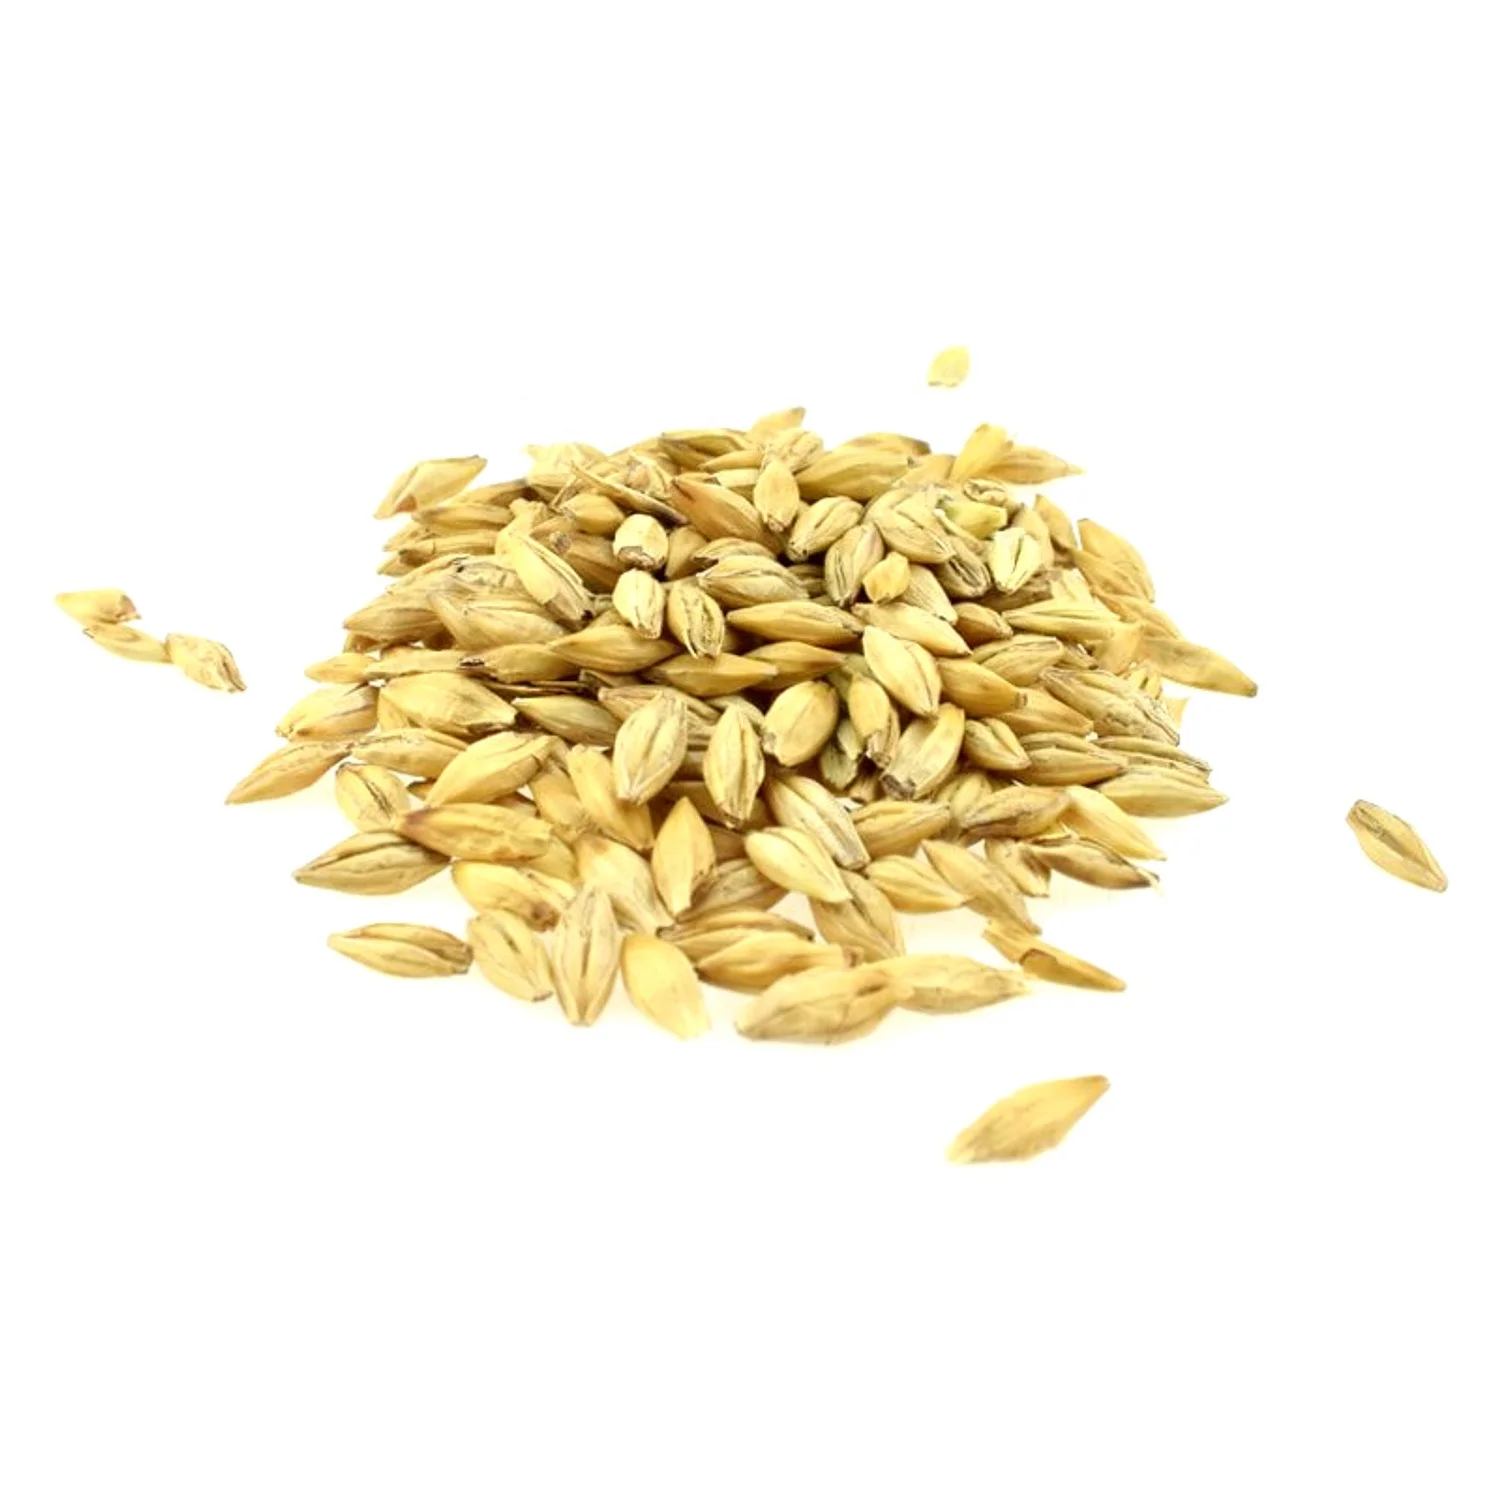 
High quality barley grain any quality requirements, from manufacturer  (1700005981029)